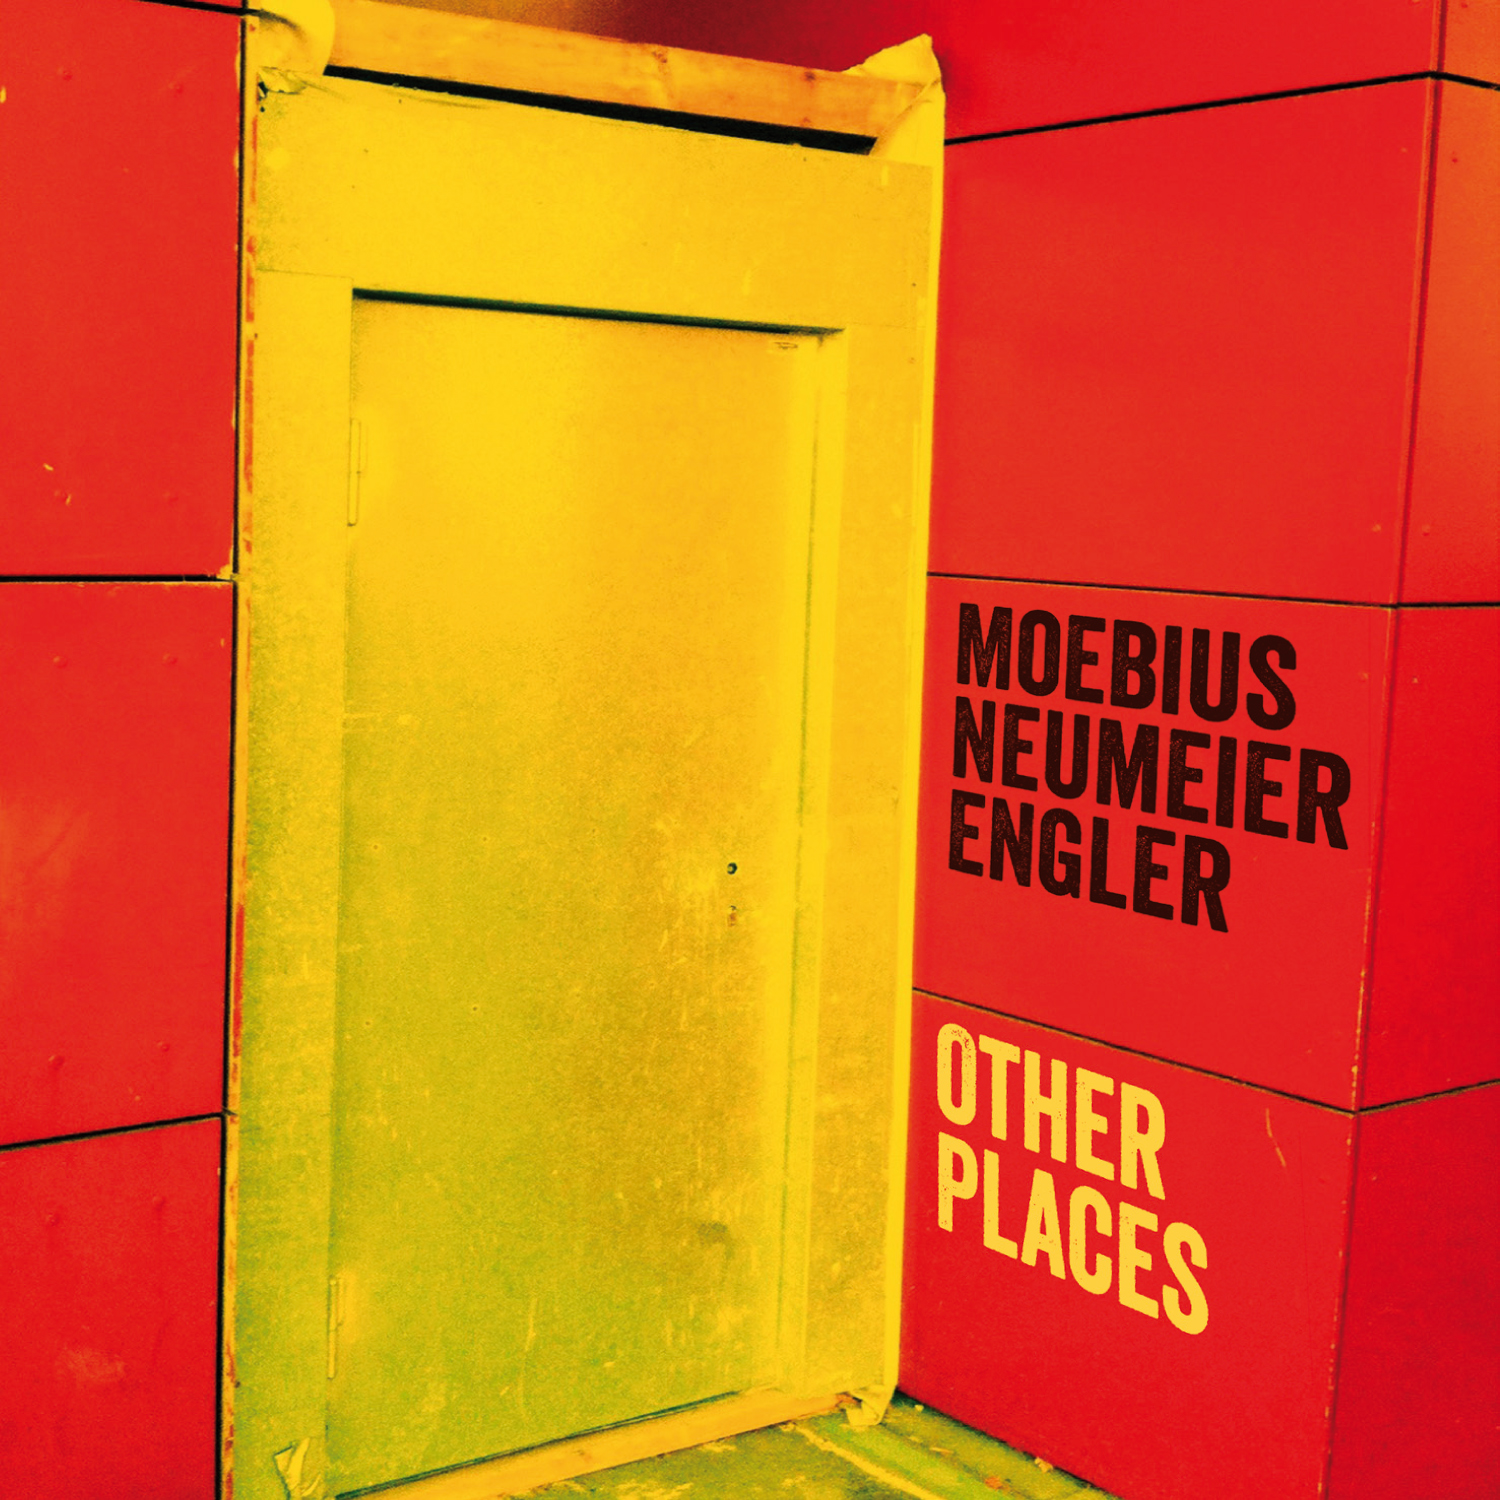 Moebius Neumeier Engler - Other Places